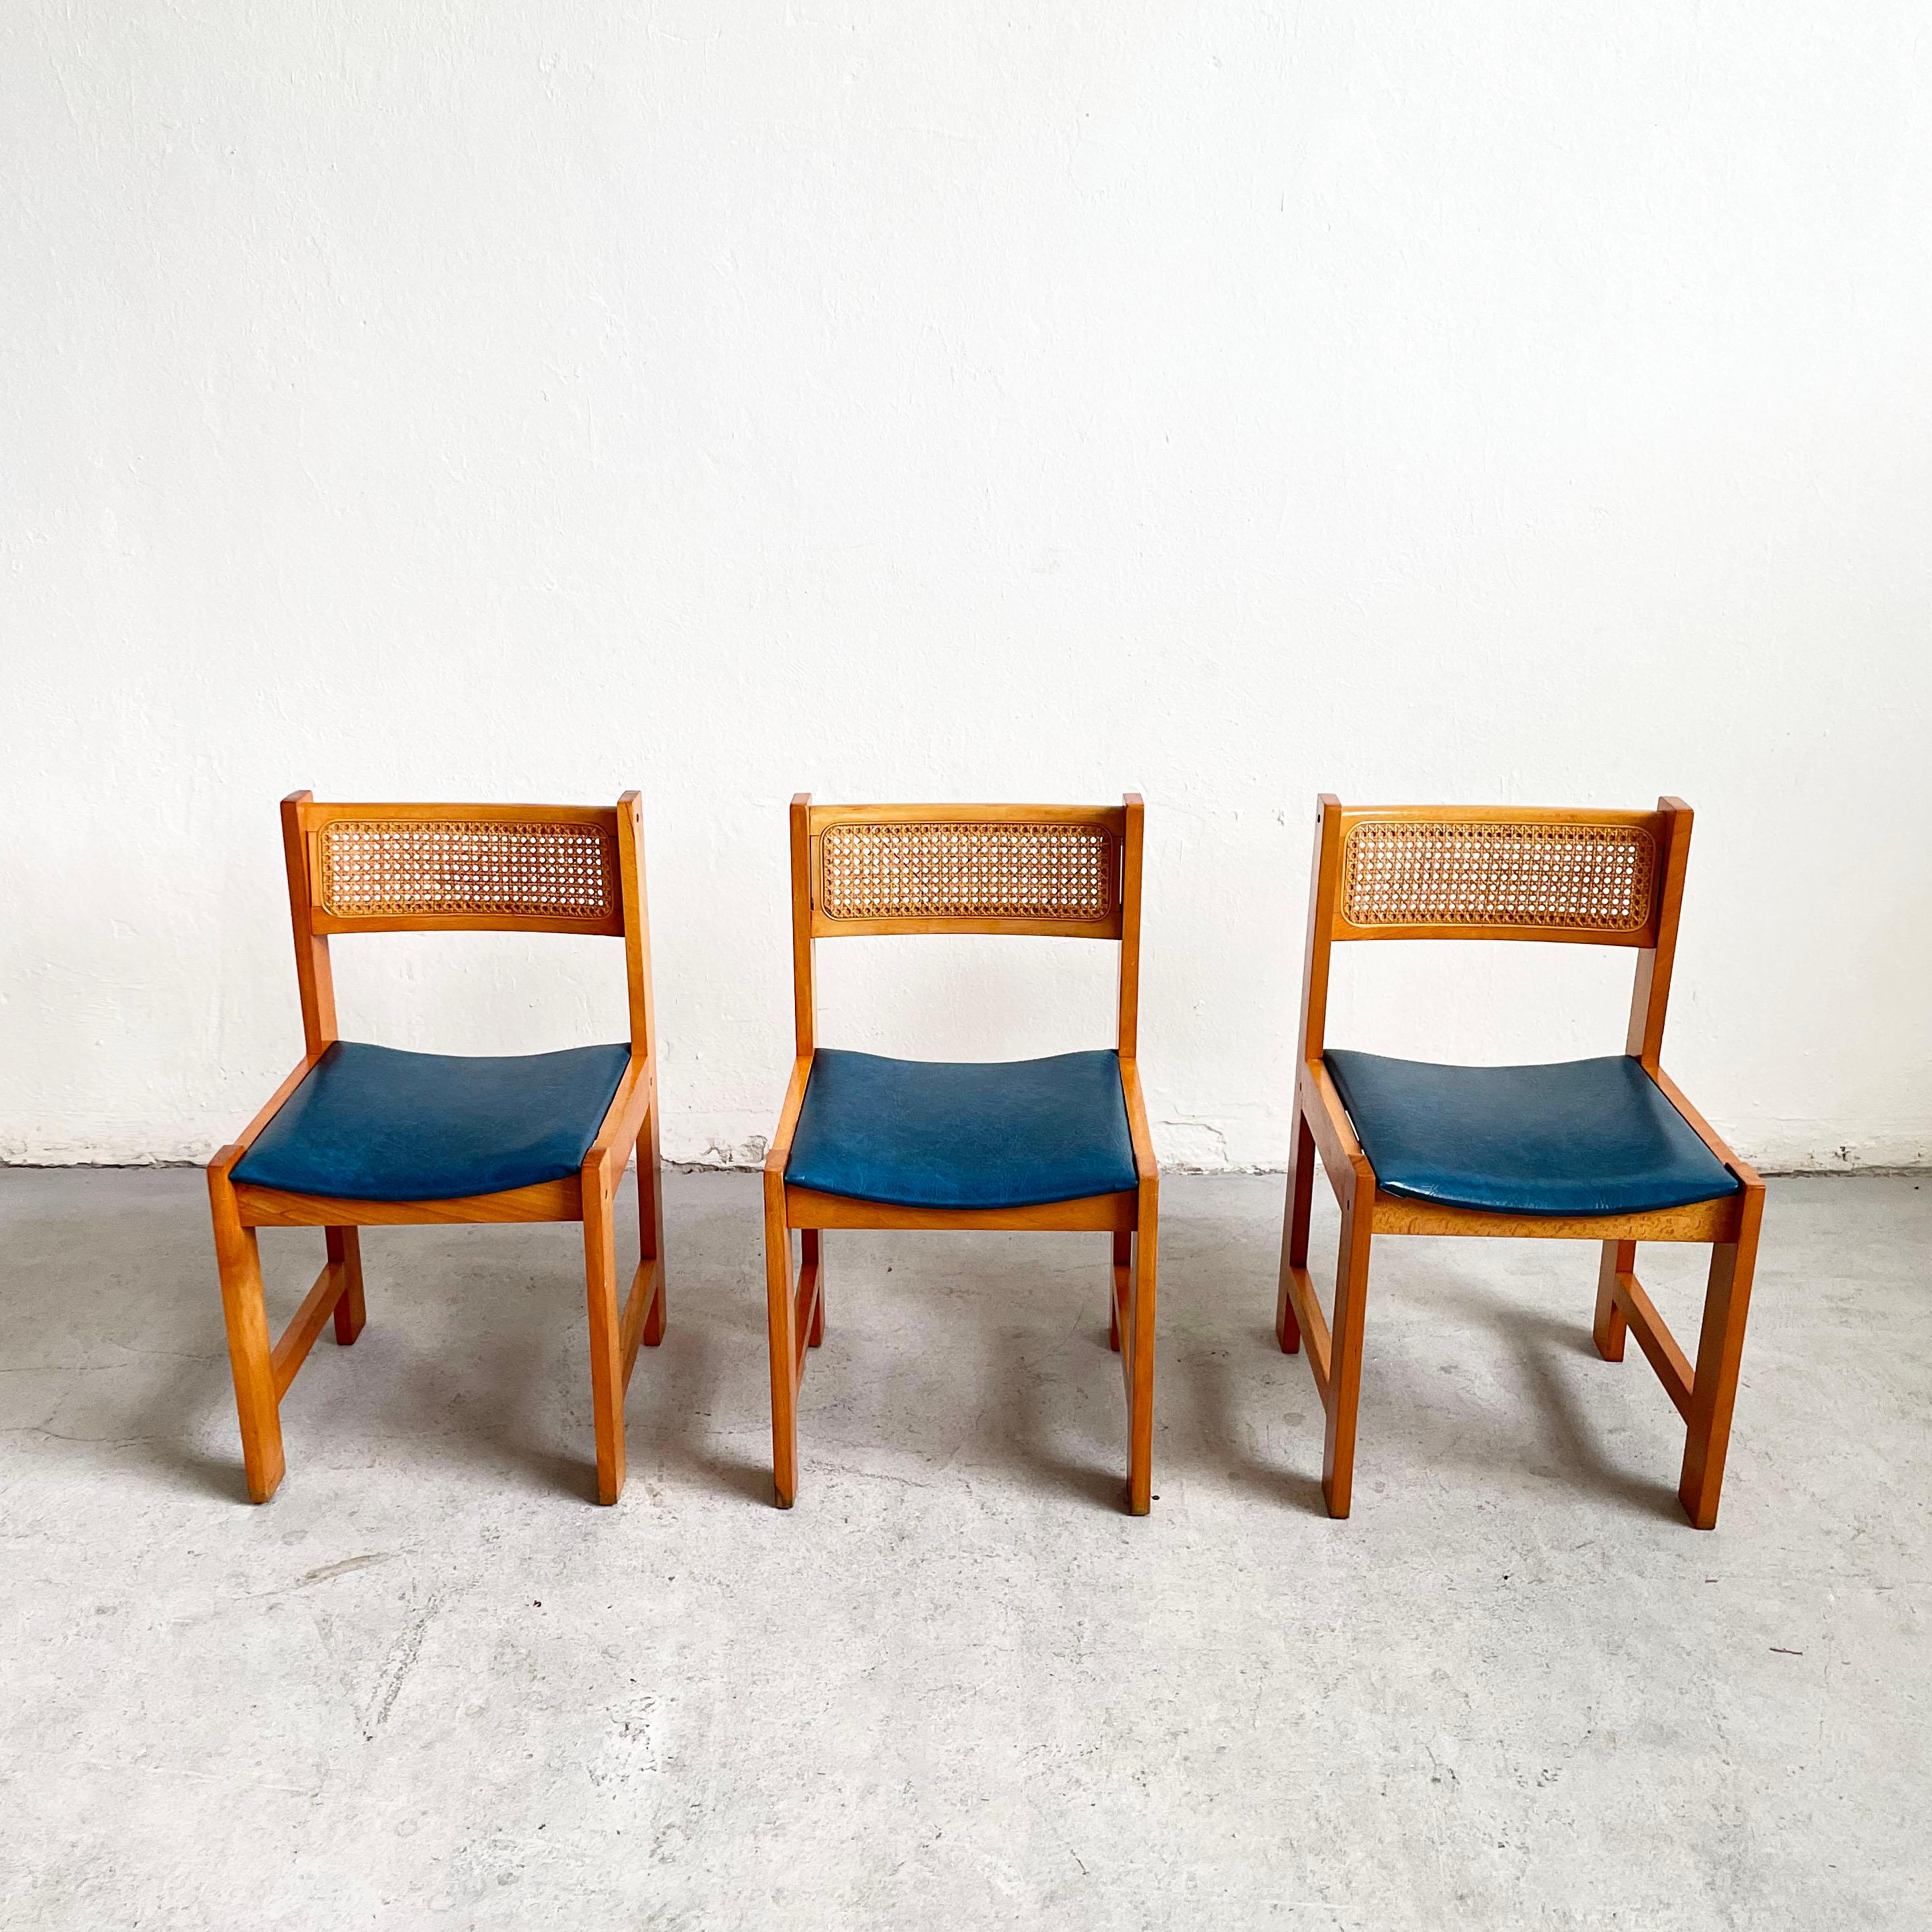 Set of 6 Mid-Century Cane Rattan and Vinyl Wooden Dining Chairs, 1960s 1970s 1